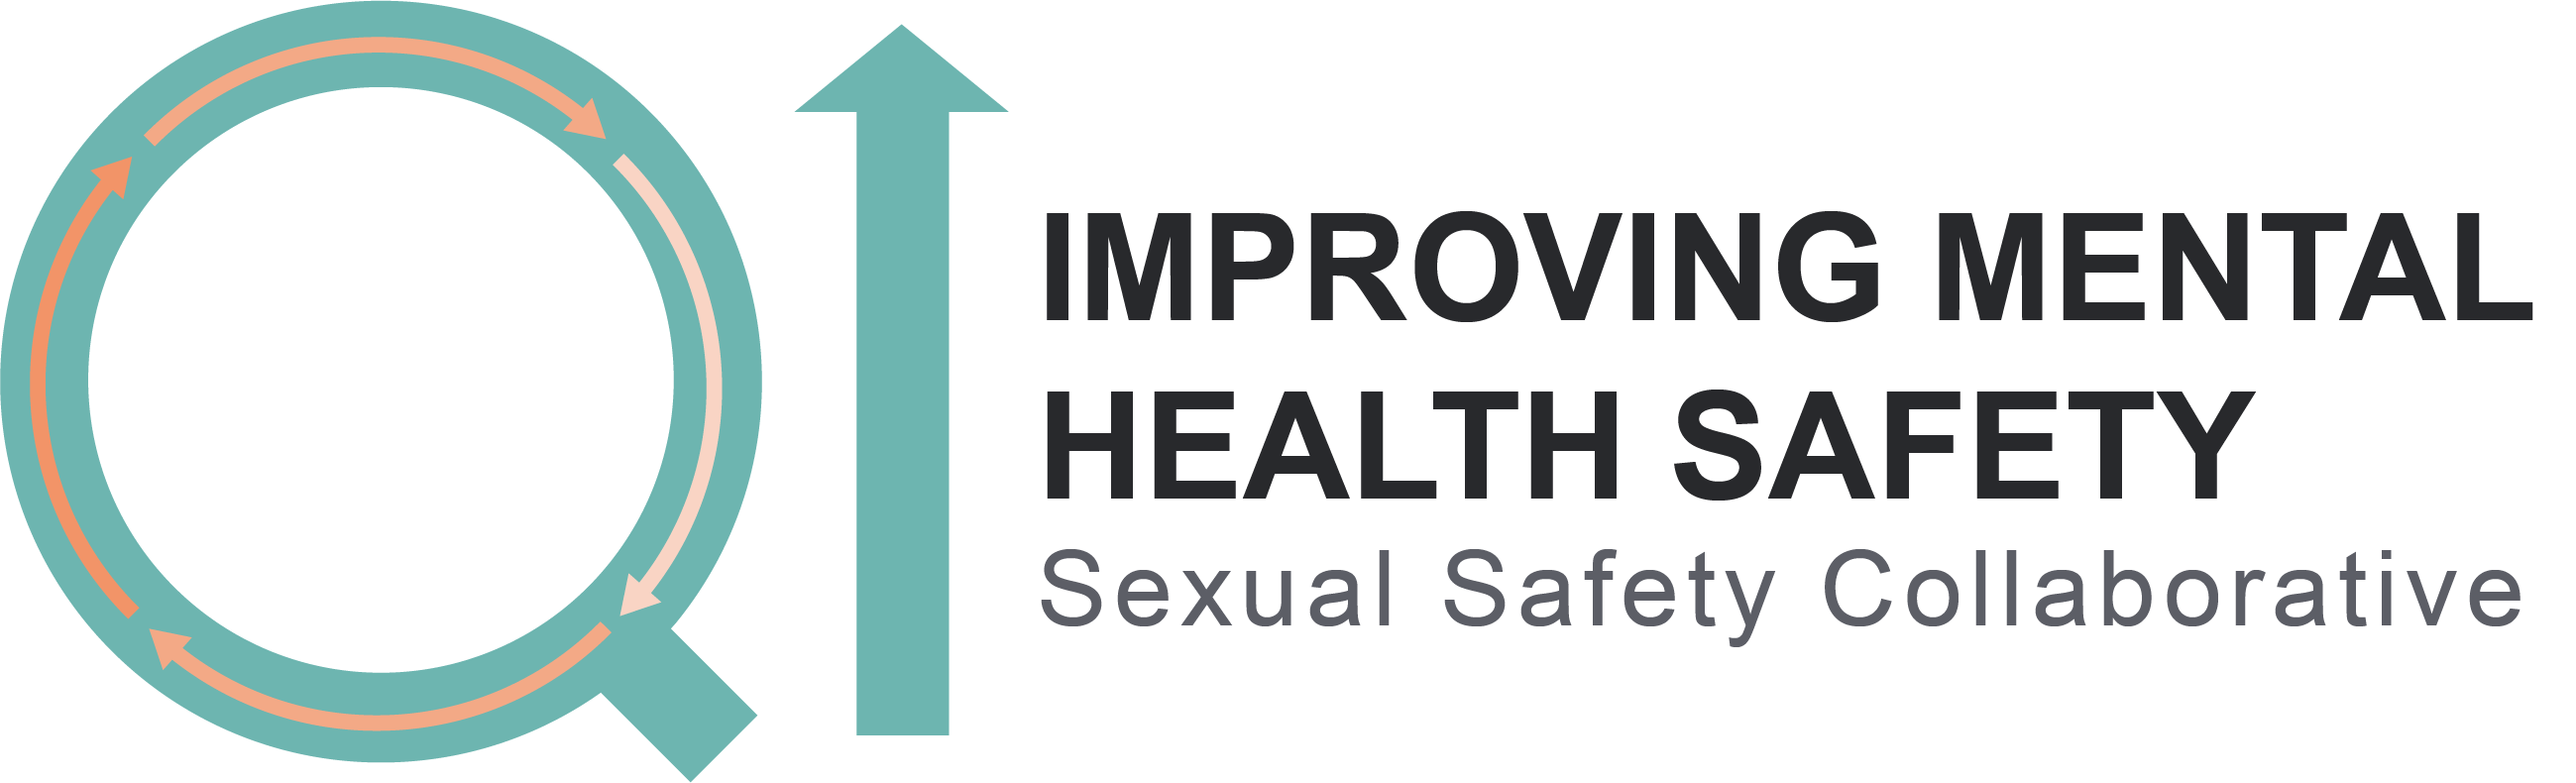 QI logo - Sexual Safety Collaborative 